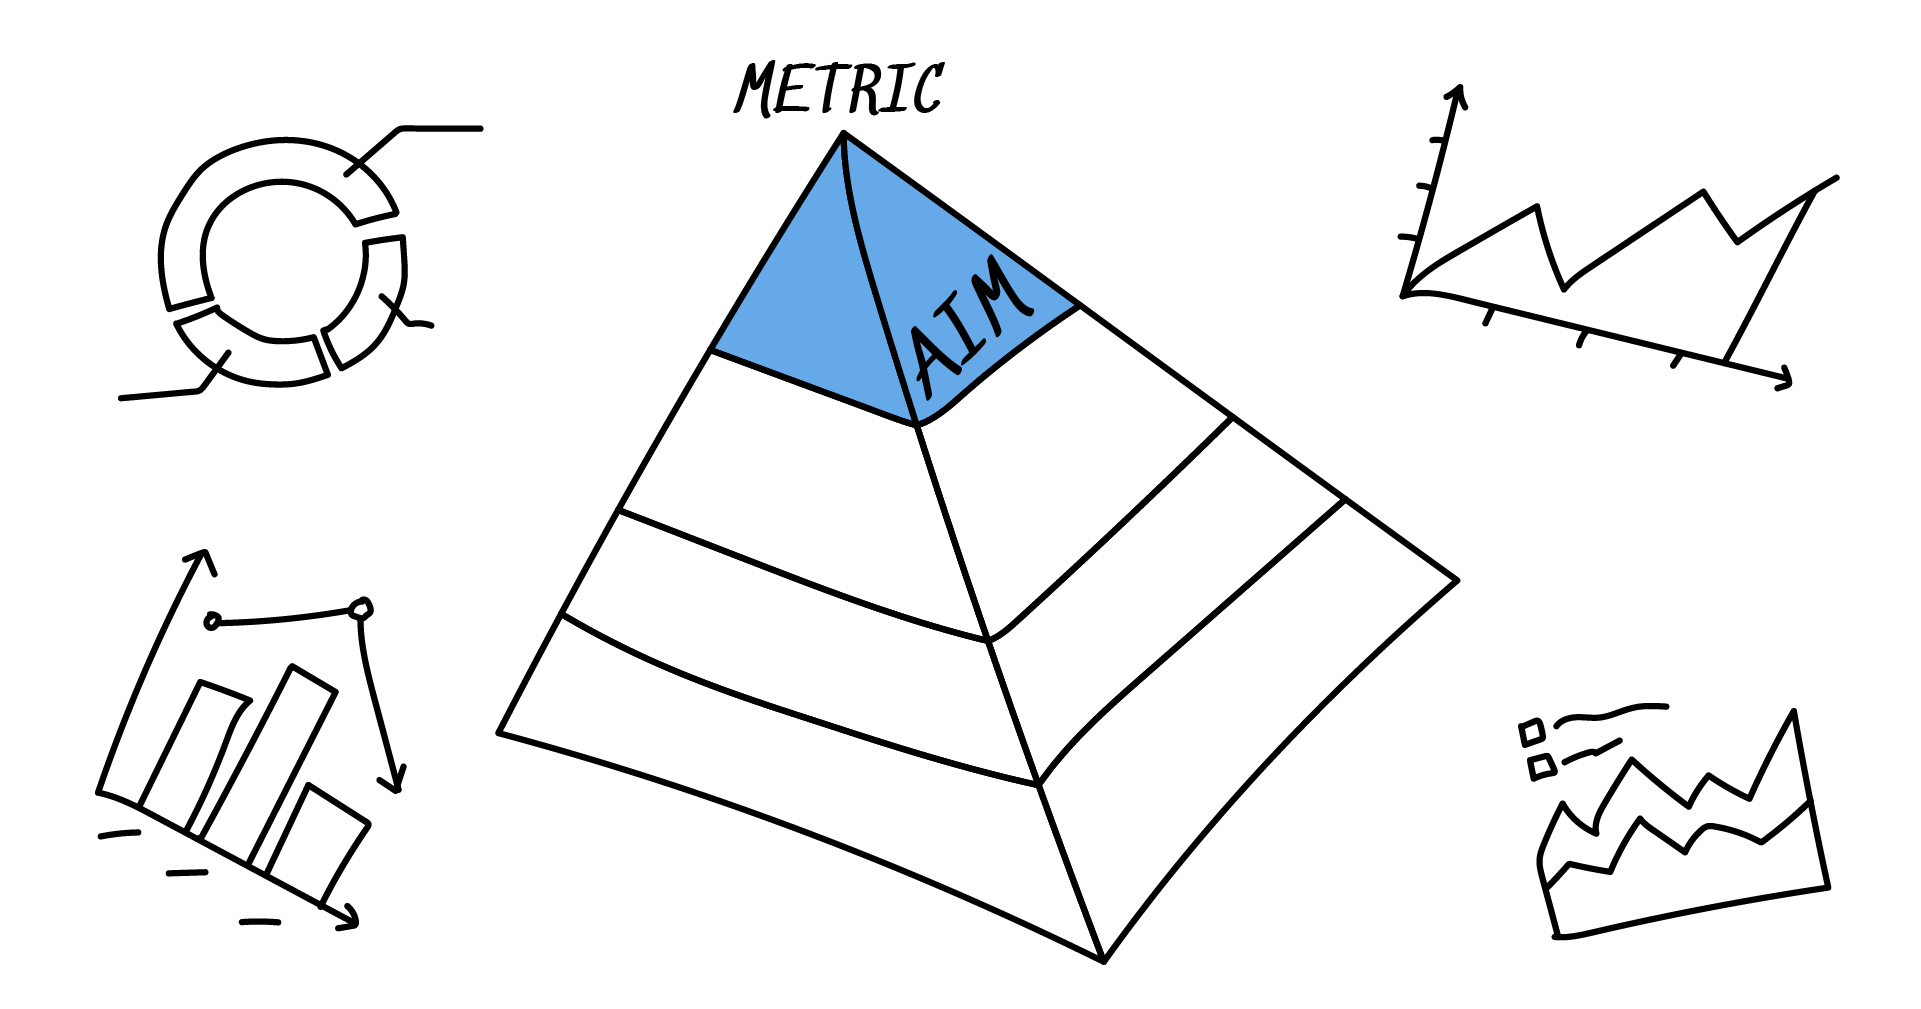 The purpose of the metric